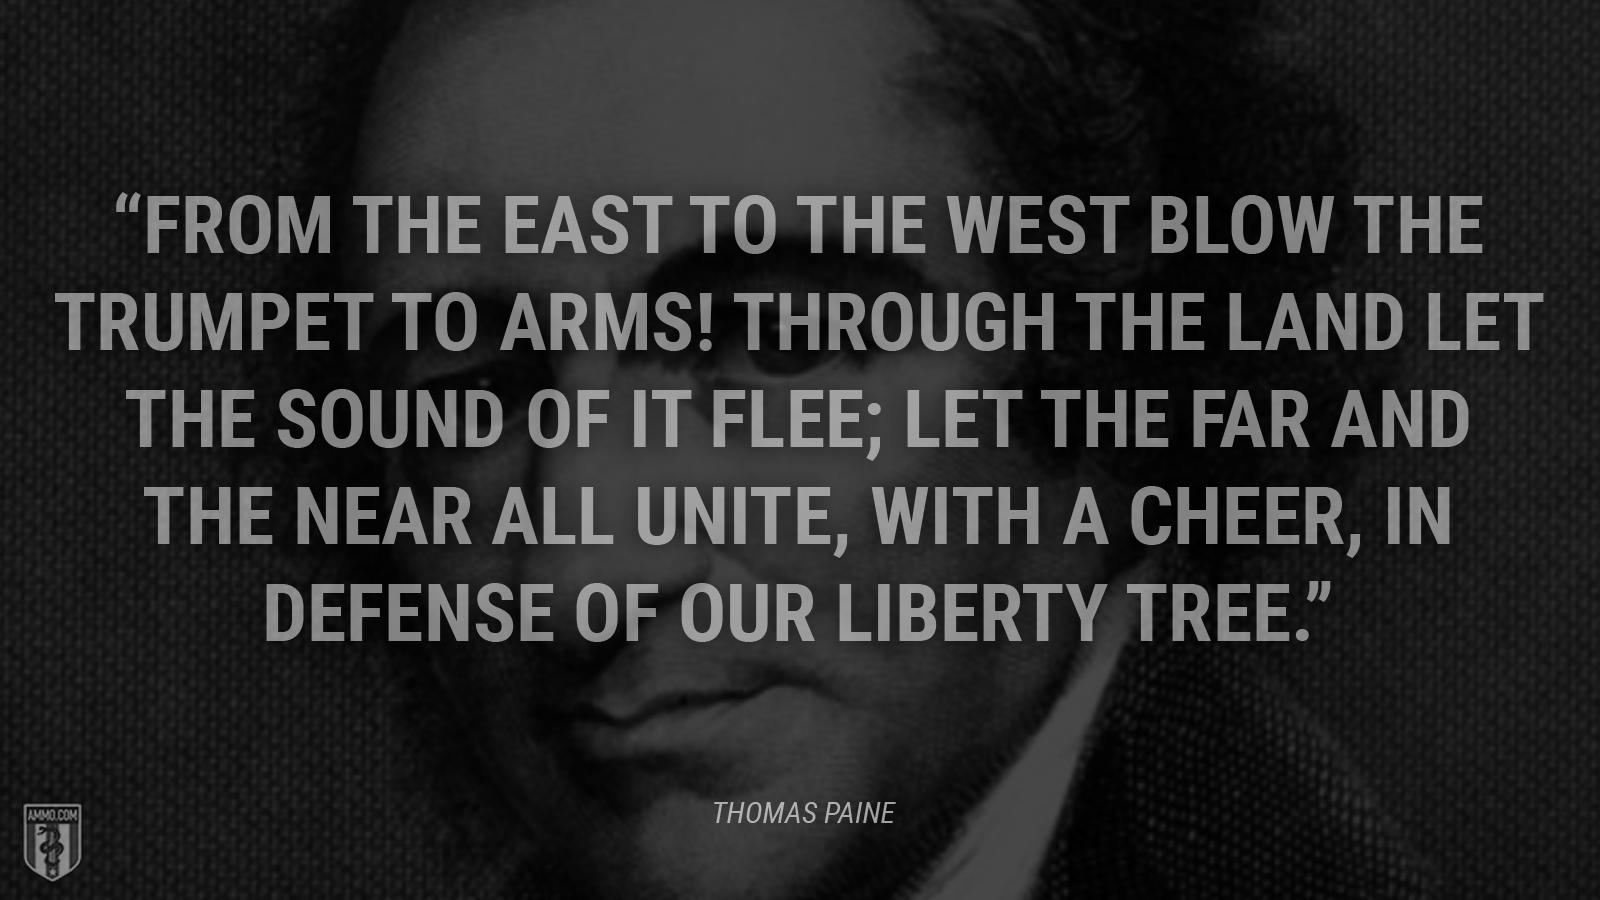 “From the east to the west blow the trumpet to arms! Through the land let the sound of it flee; Let the far and the near all unite, with a cheer, In defense of our Liberty Tree.” - Thomas Paine